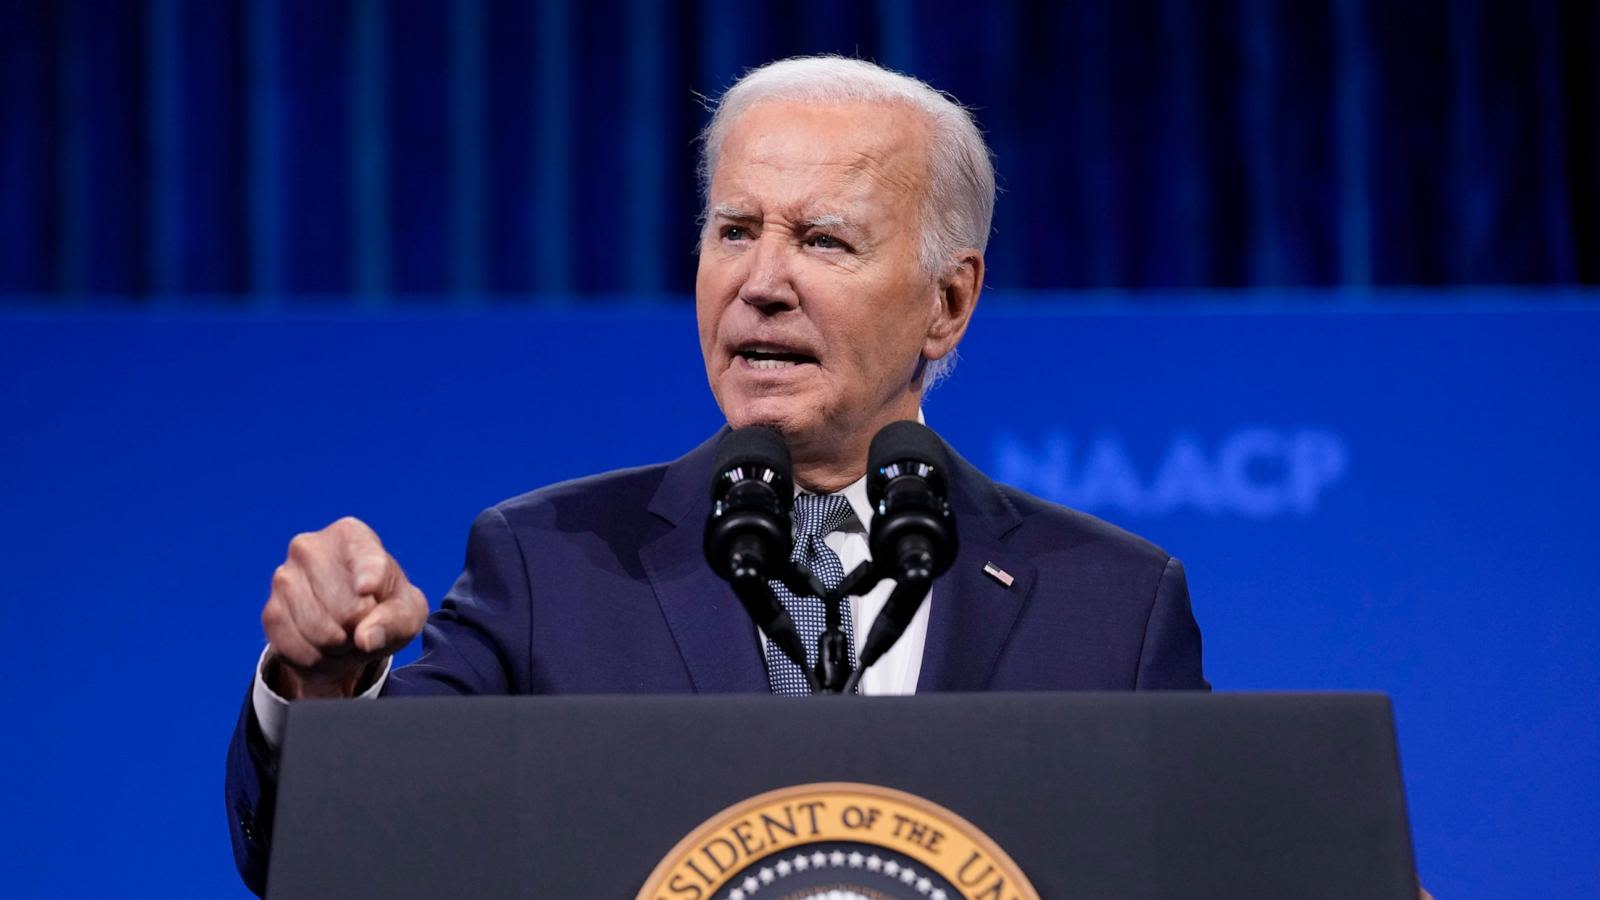 Some DNC delegates push to remove Biden from top of ticket, oppose virtual roll call